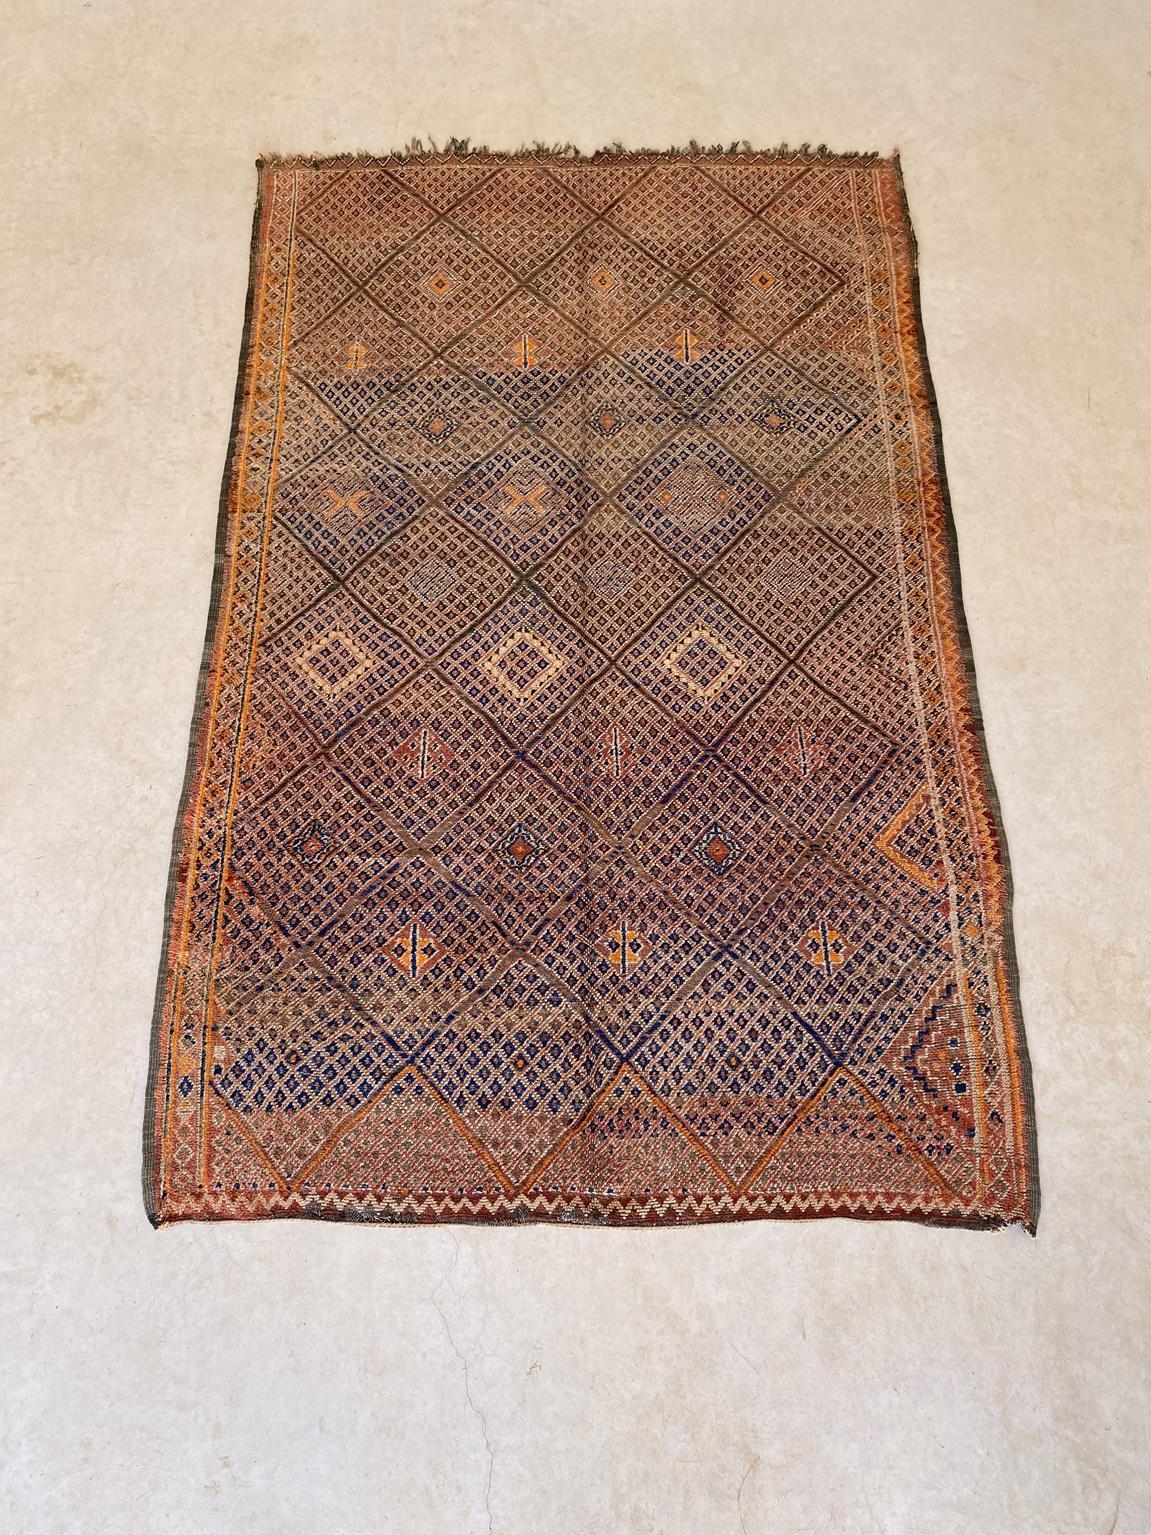 This beautiful vintage Beni Mguild rug is a great find! The main background color is a mix of terracotta and soft orange with intricate designs -mostly tiny diamonds- in cream, orange and navy blue. The pattern is a multiplied diamonds and the whole